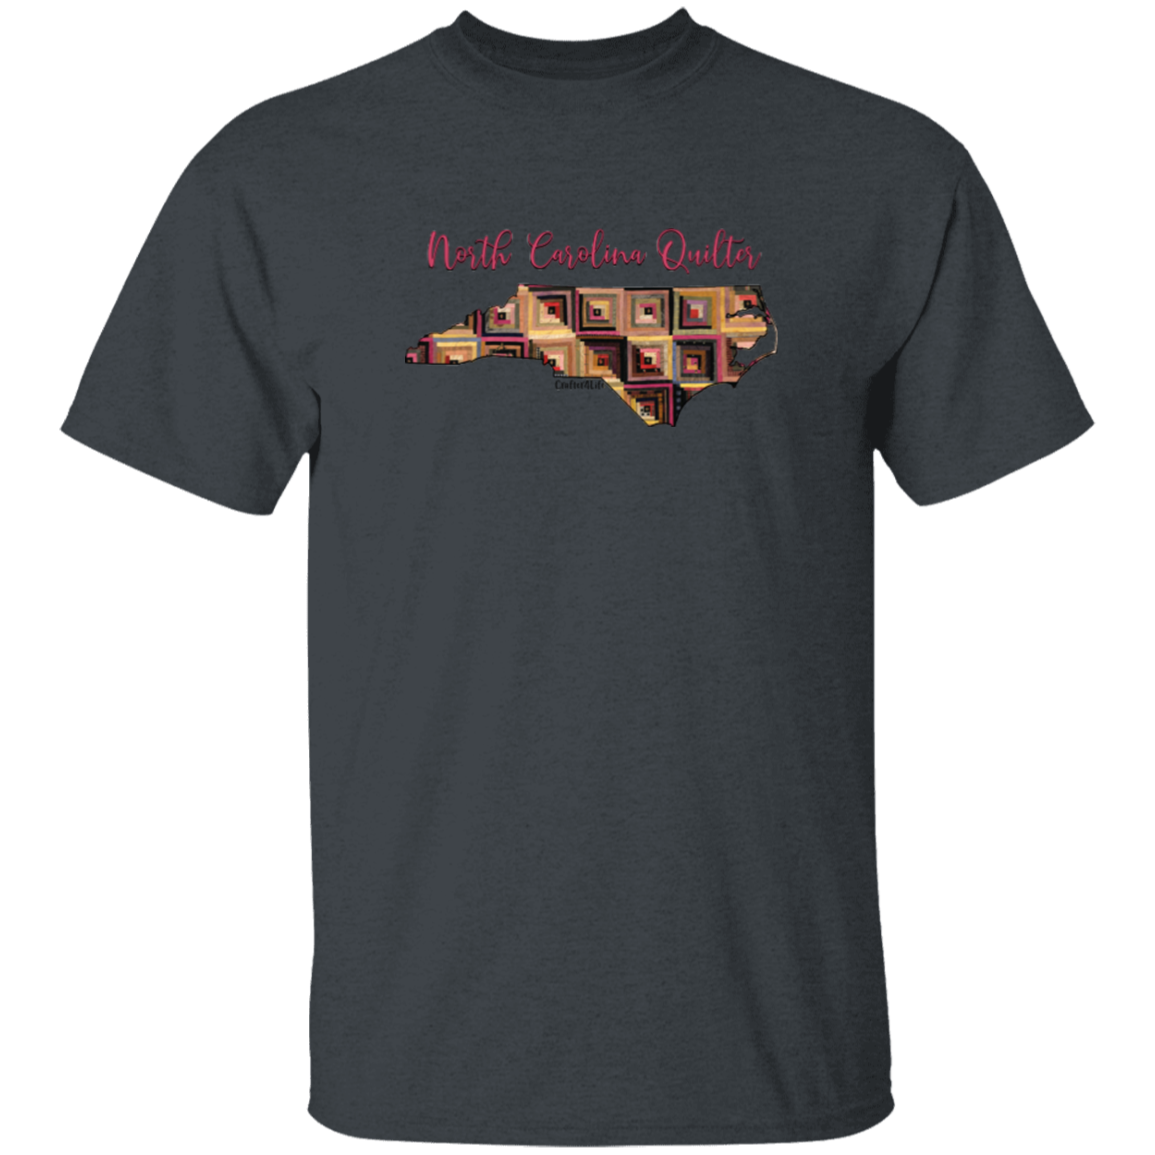 North Carolina Quilter T-Shirt, Gift for Quilting Friends and Family